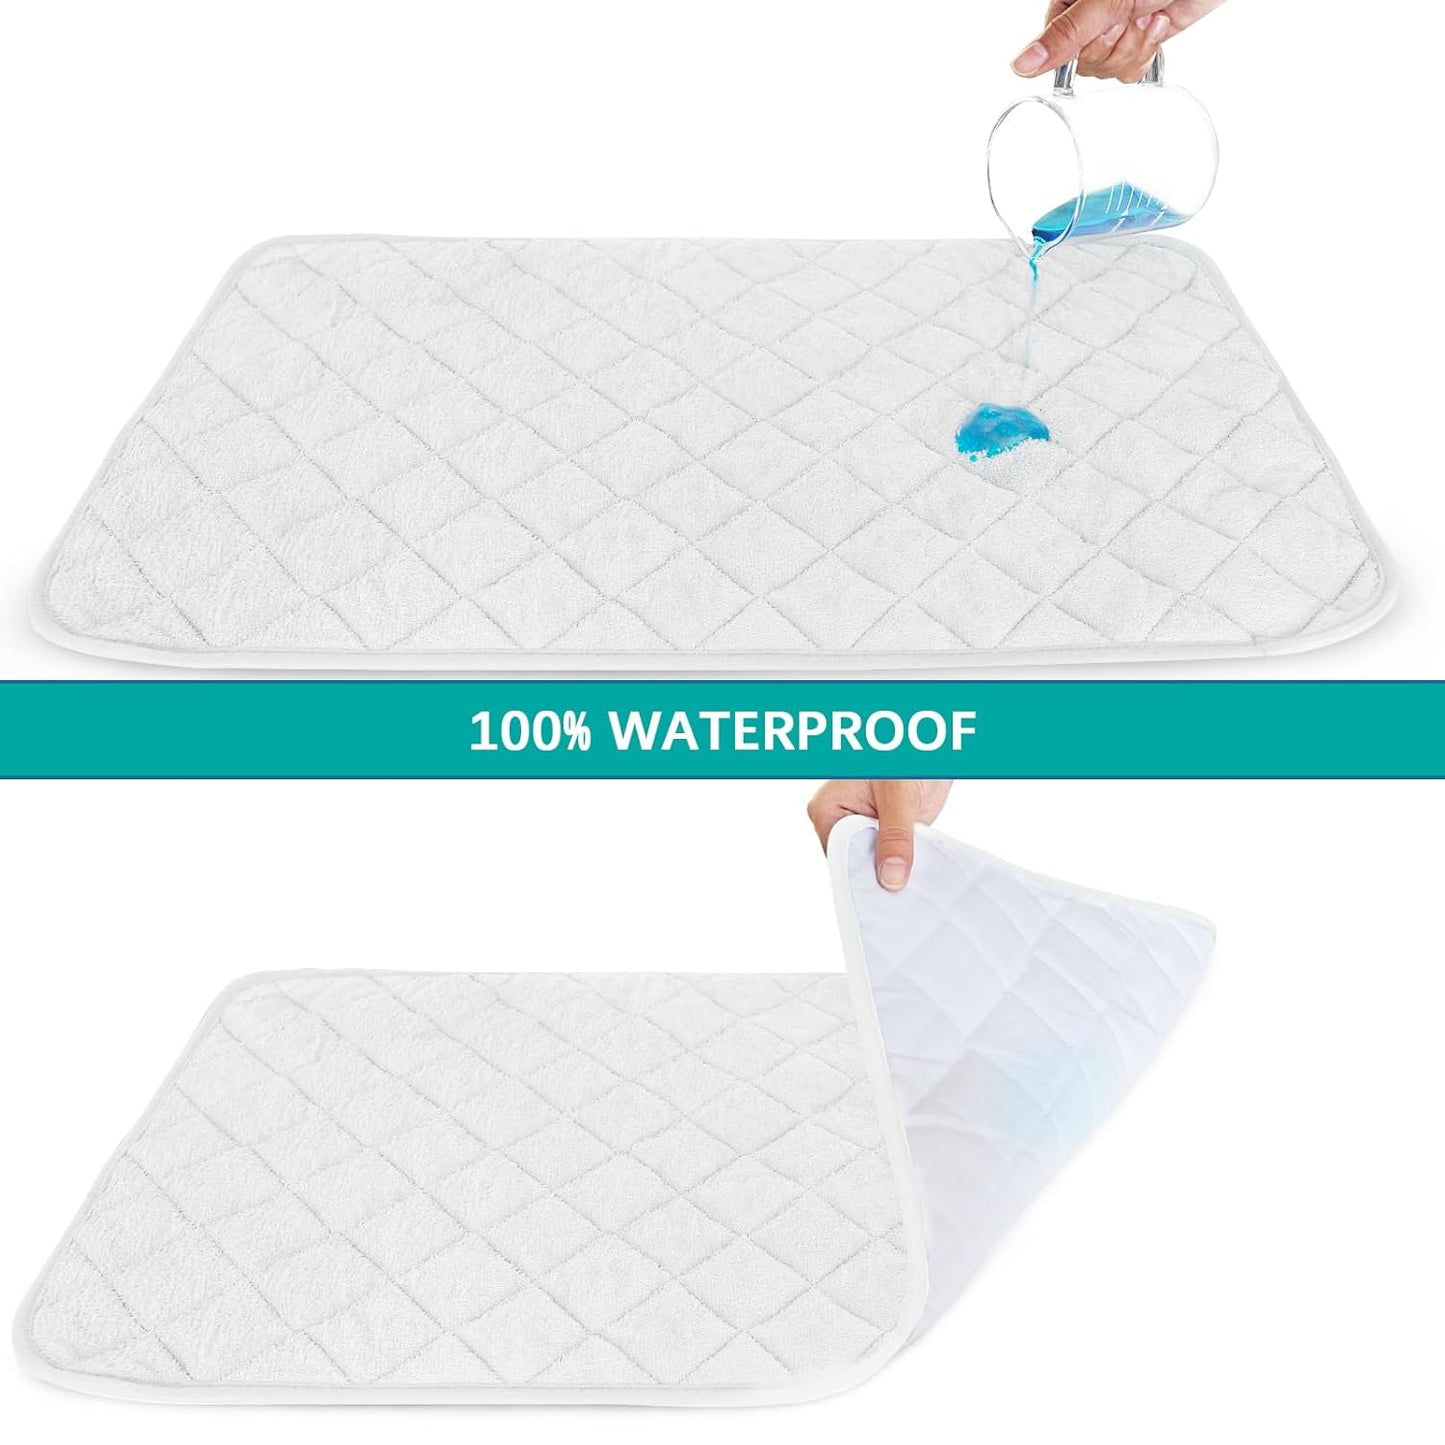 Changing Pad Liners - 5 pack, Bamboo Terry Surface, Waterproof & Absorbent, Diaper Mat